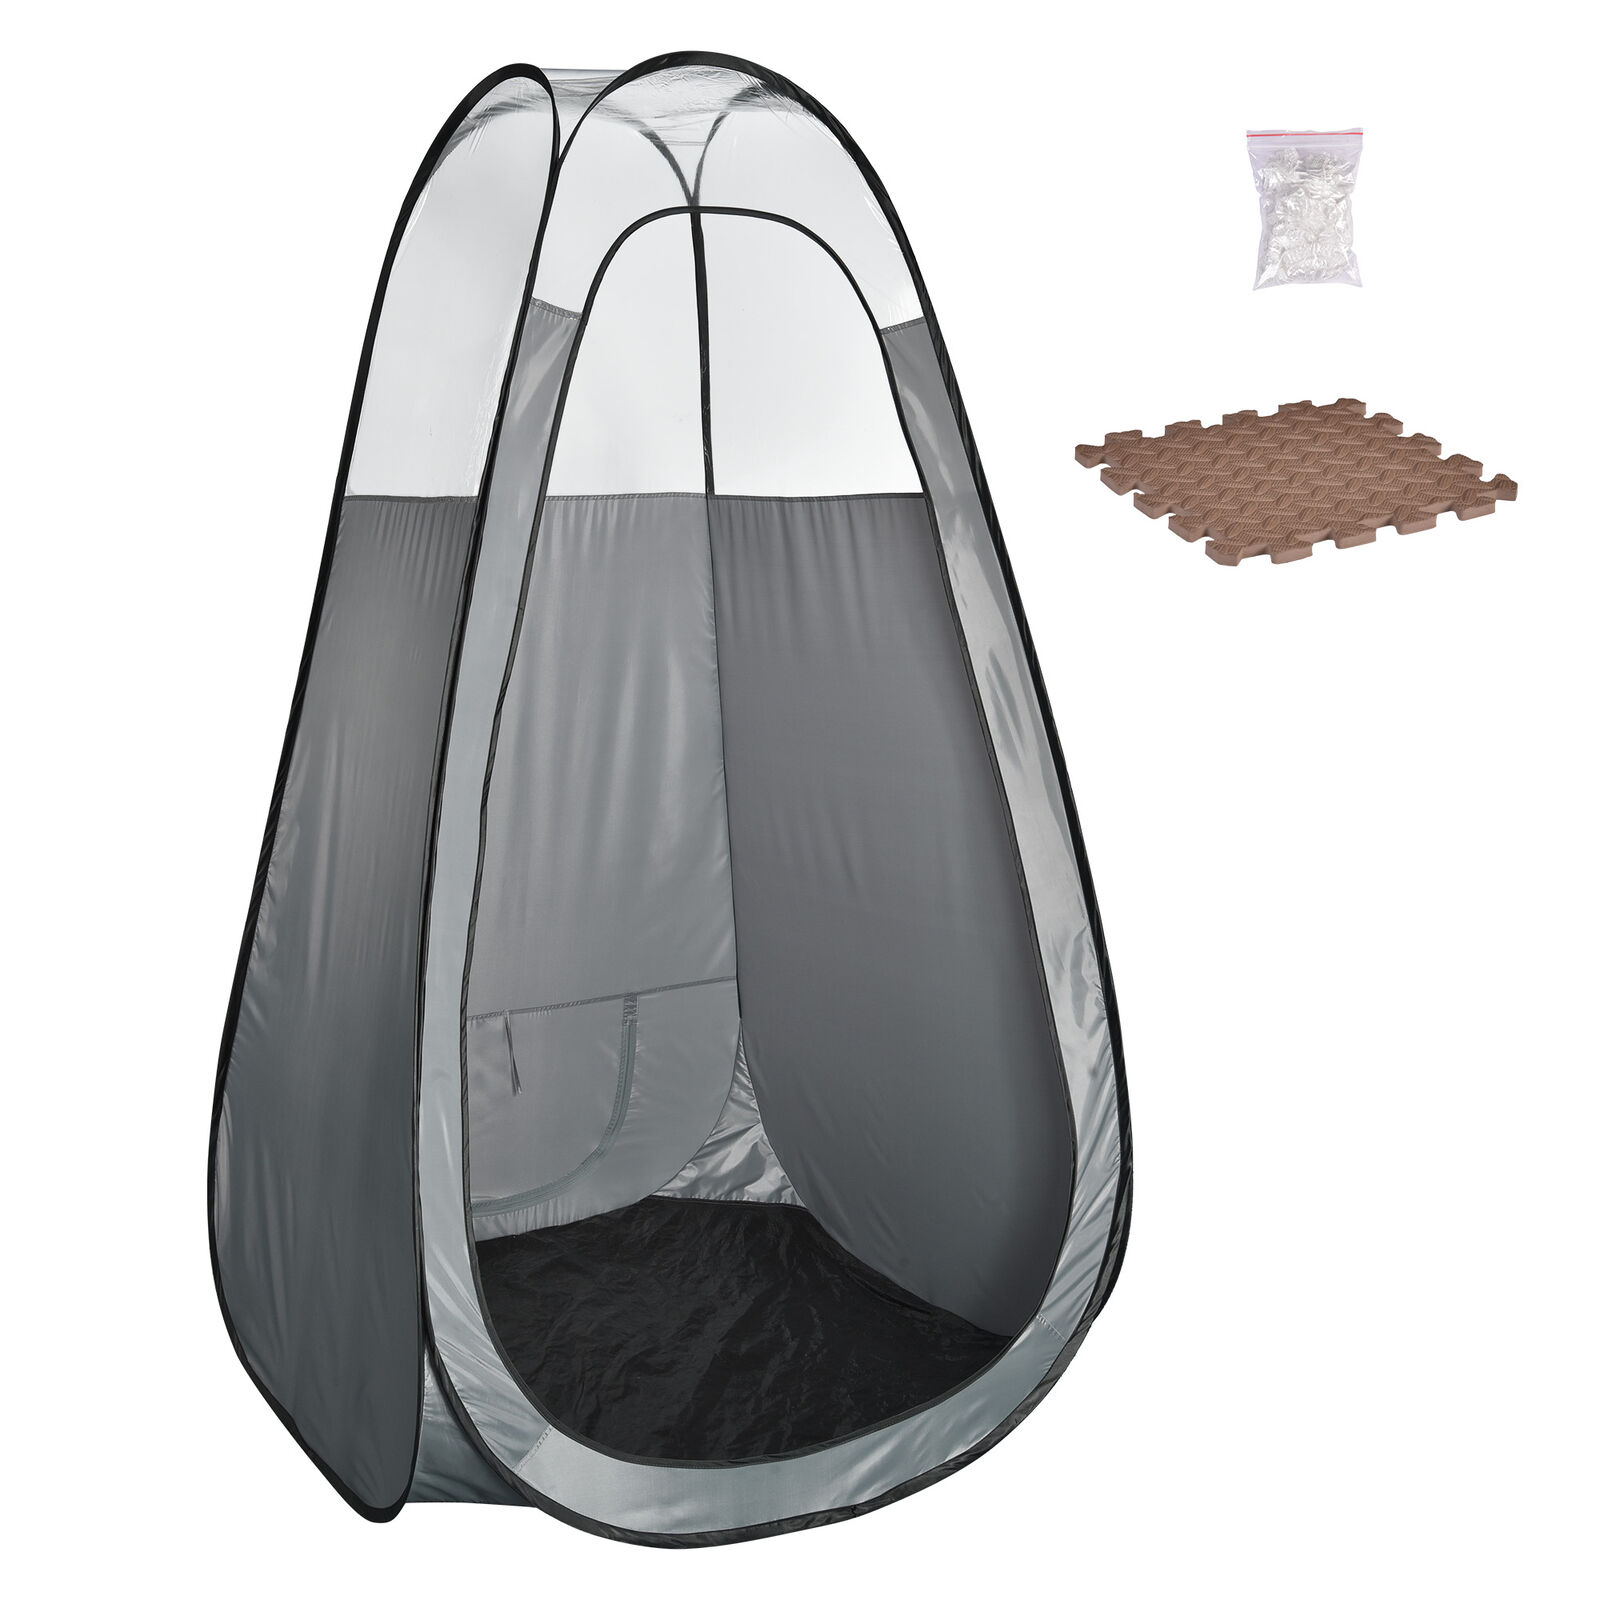 Portable Spray Tanning Tent Pop Up Oxford Booth Airbrush Sunless Clear Window